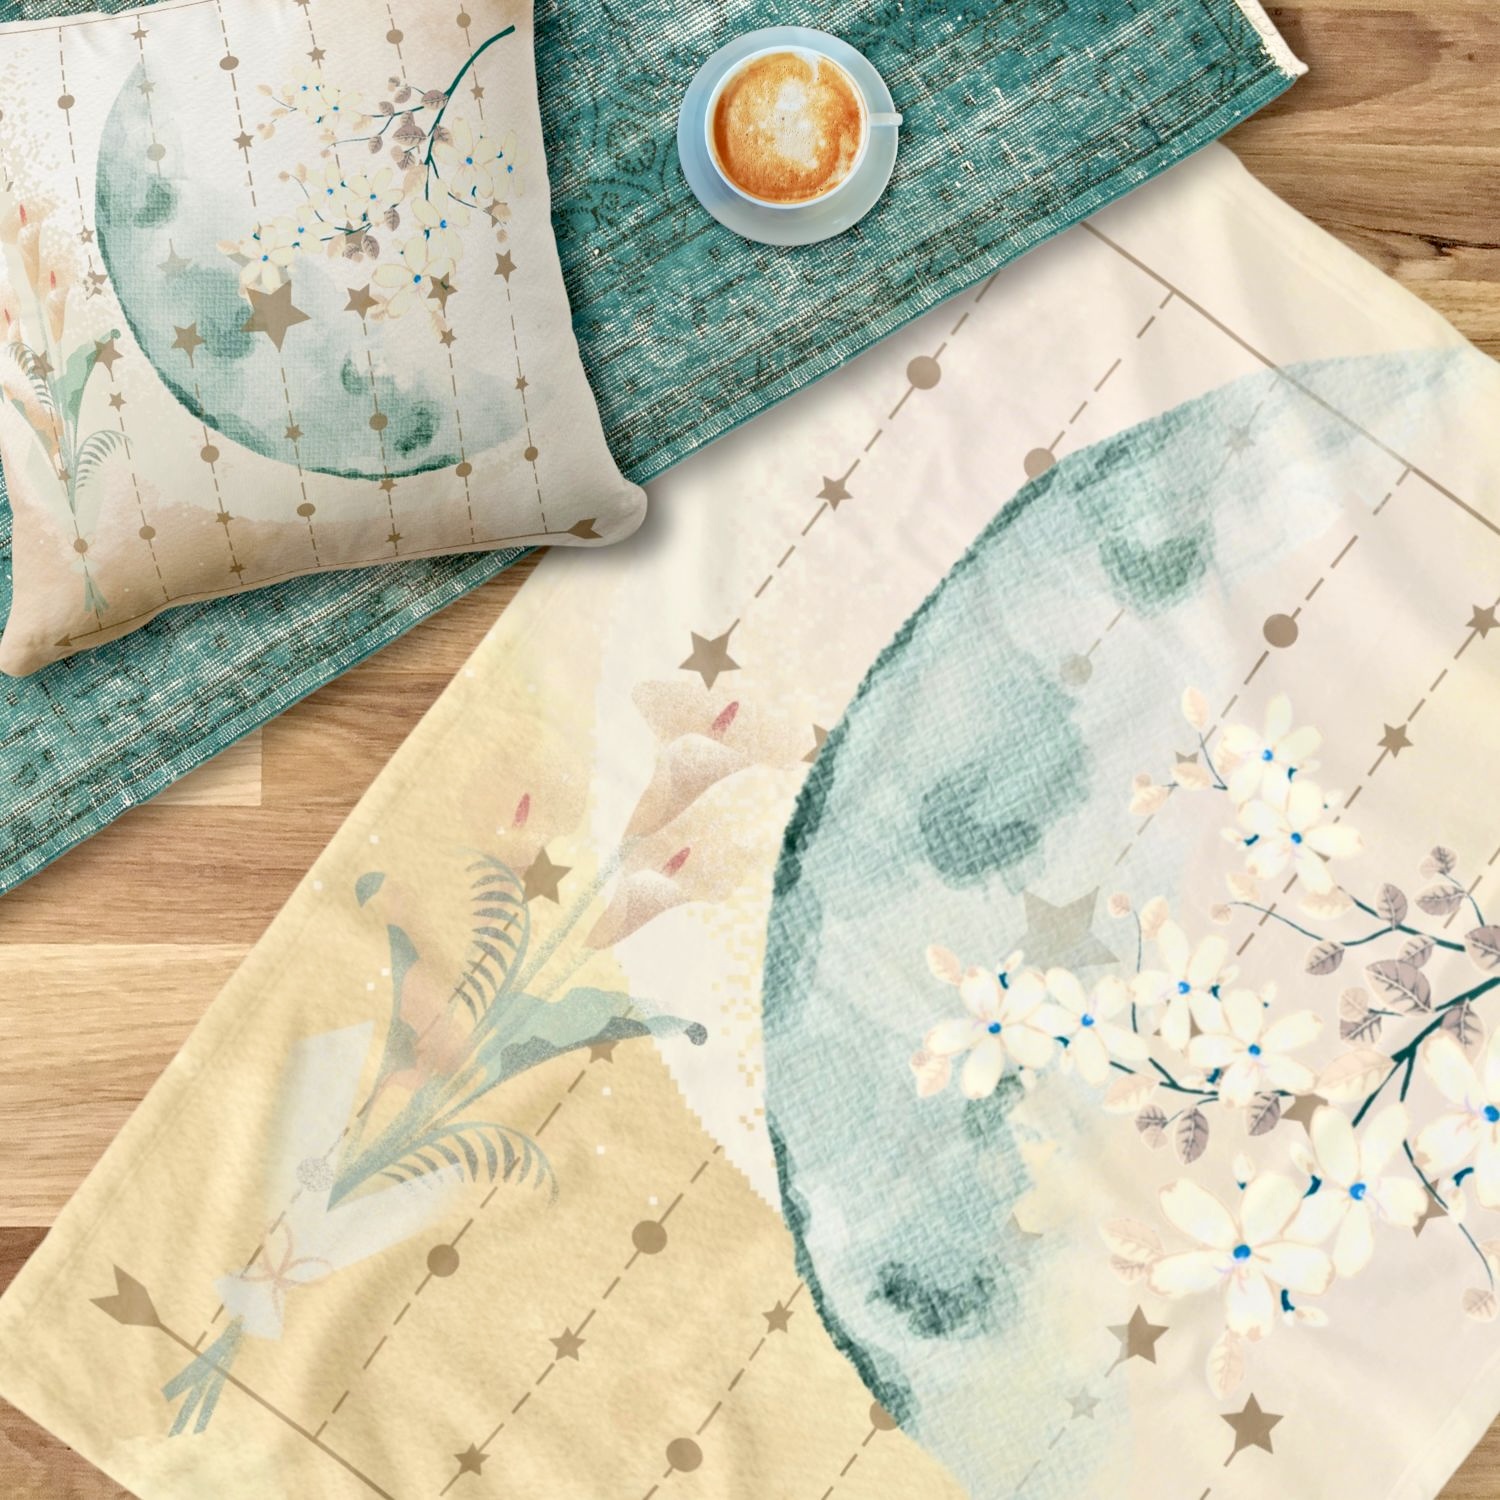 Close-up view of the Earthy Decorative Moonlit Flowers Boho Fleece Blanket, showcasing its intricate floral design and earthy tones.